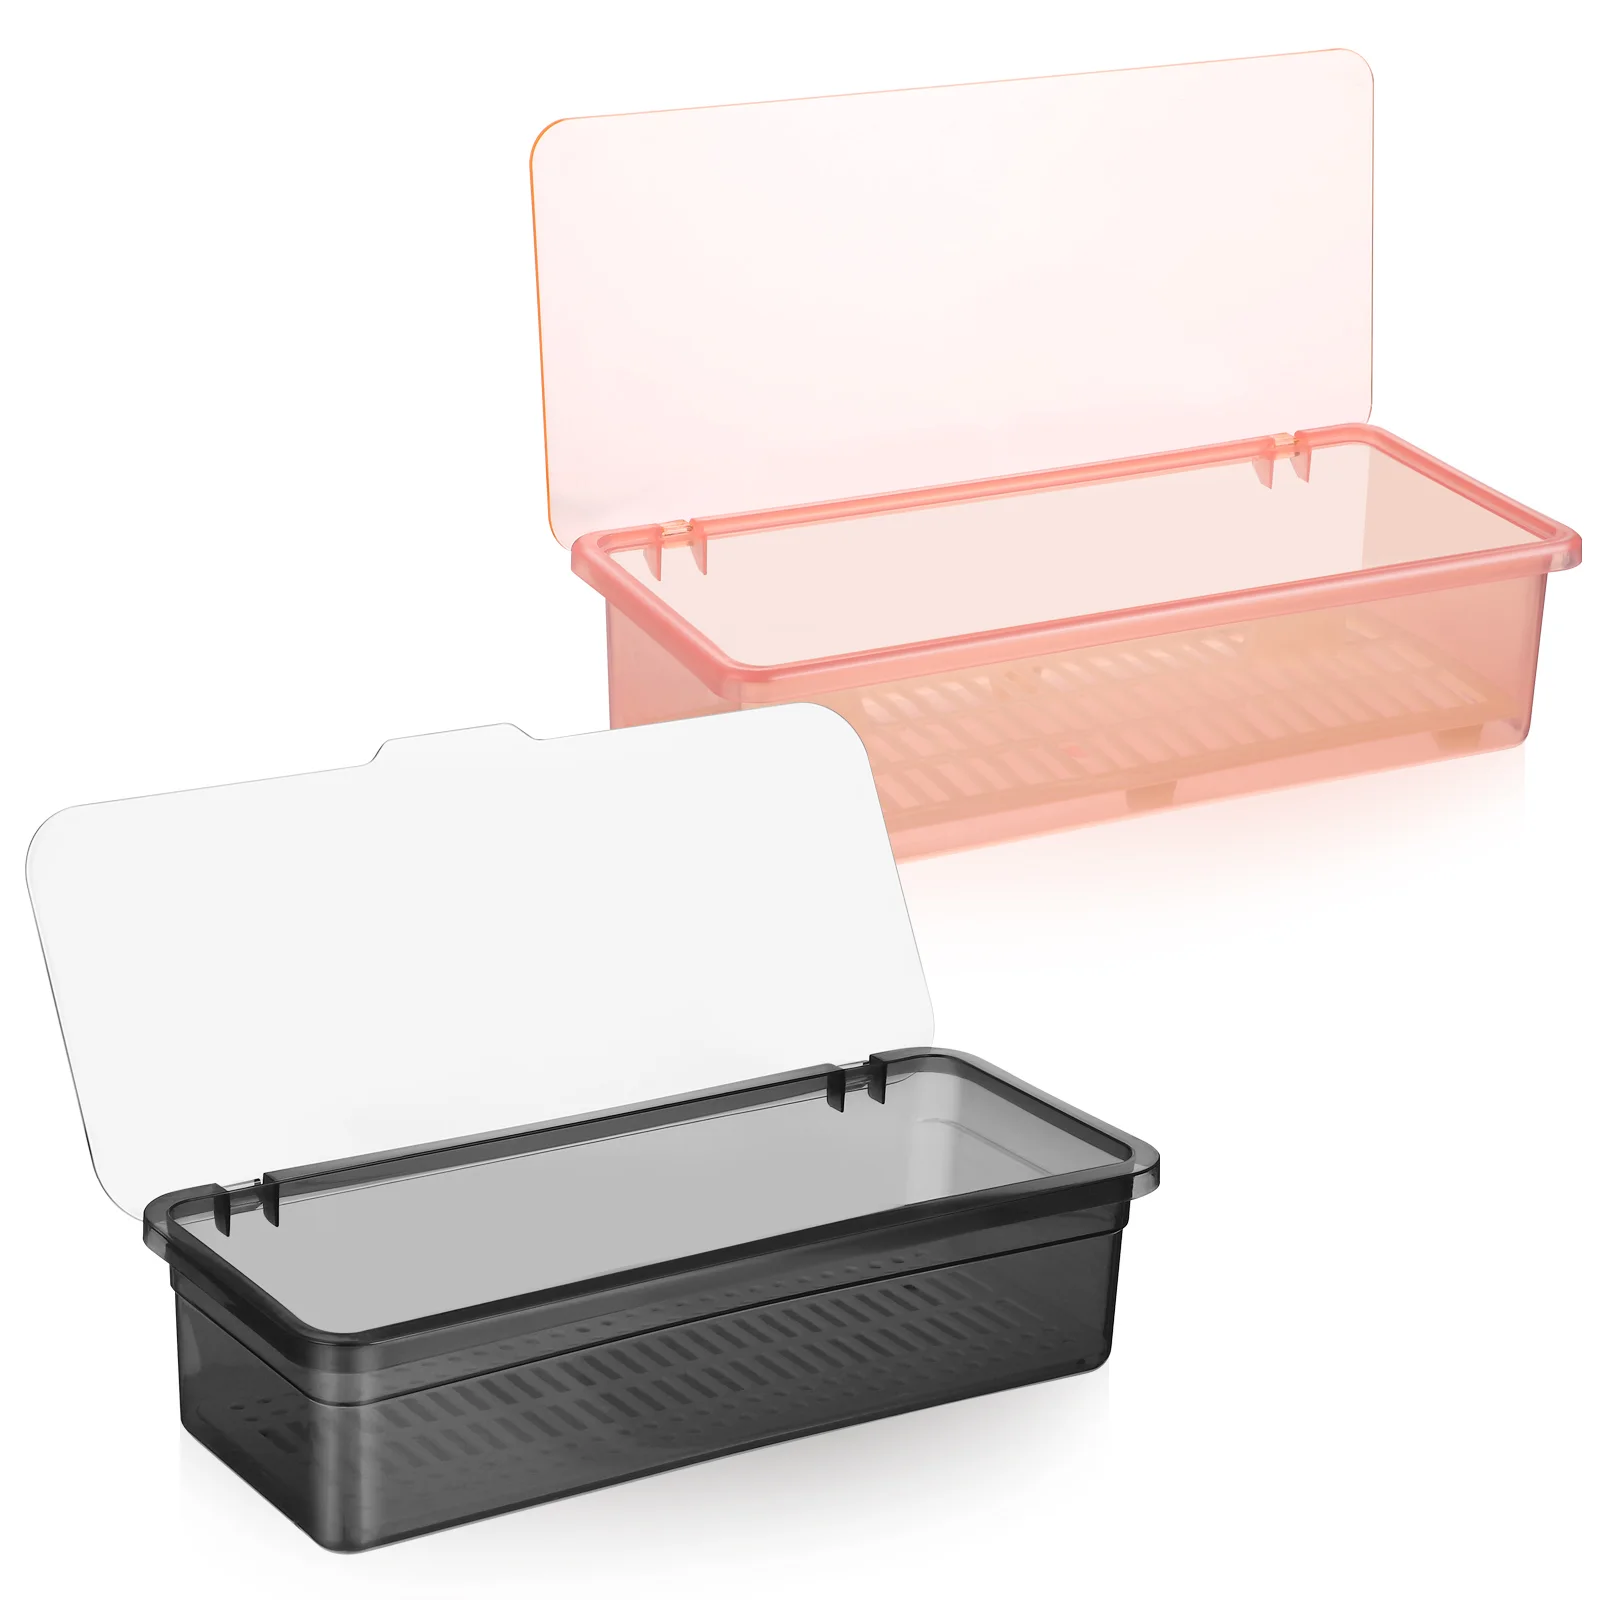 

2 Pcs Plastic Drawers Drain Box Utensil Tray with Lid Cutlery Rack Silverware Storage Containers Organizer